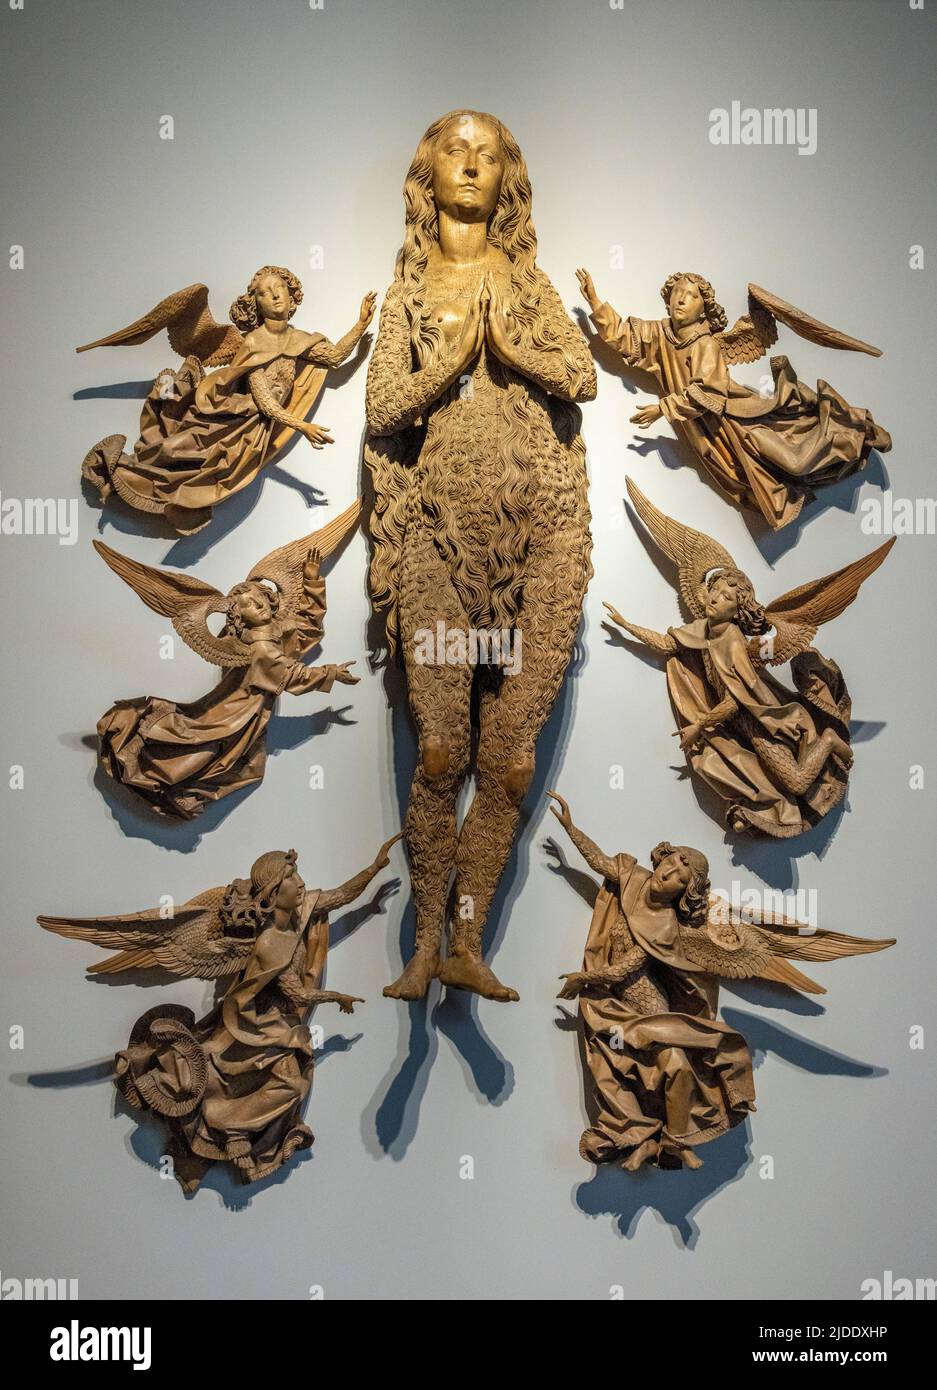 carved wooden sculpture, Ascension of St Mary Magdalene, by Tilman Riemenschneider, 1492, Bayerisches Nationalmuseum, Munich, Germany Stock Photo